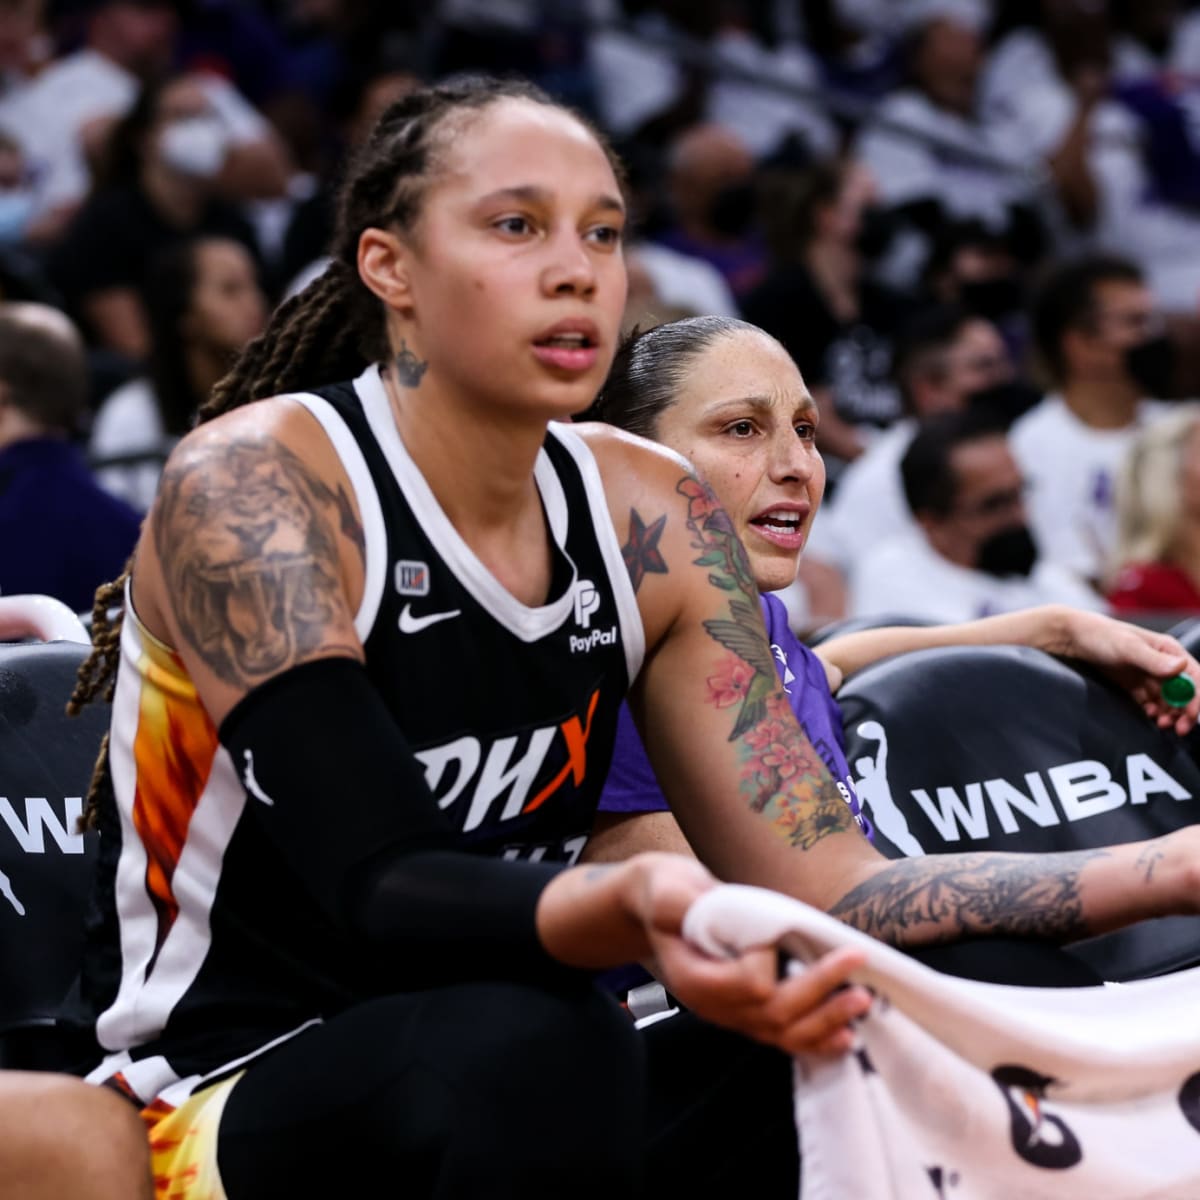 Wnba Players Reveal What It S Really Like In Russia The Spun What S Trending In The Sports World Today